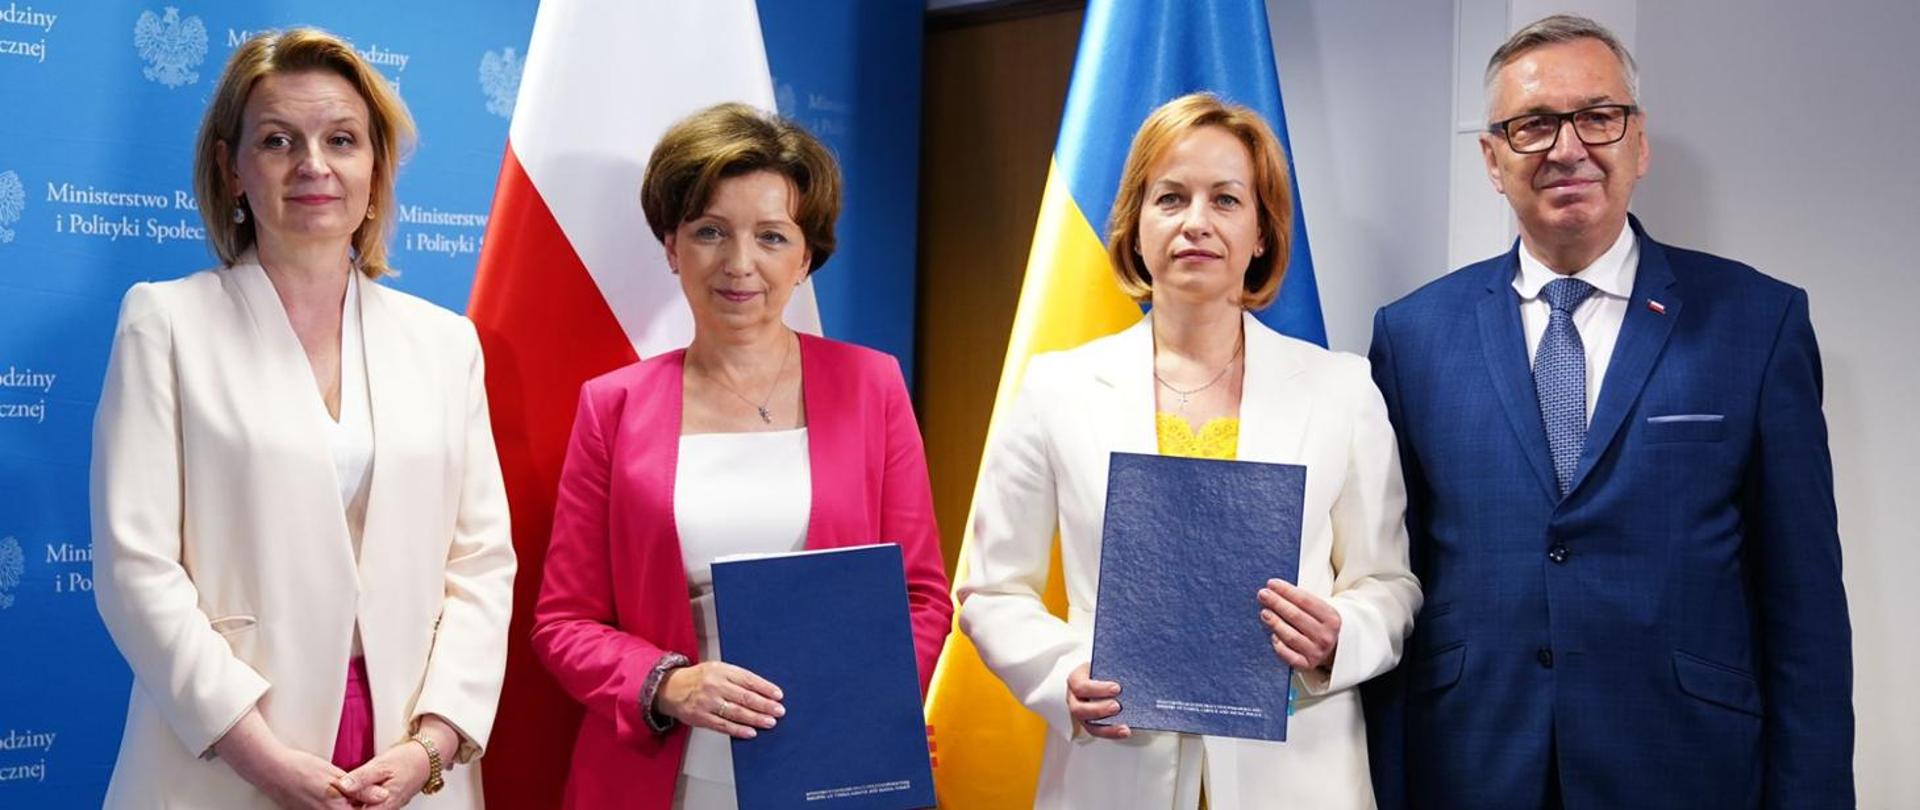 Polish and Ukrainian Ministries signed a declaration on the protection of children